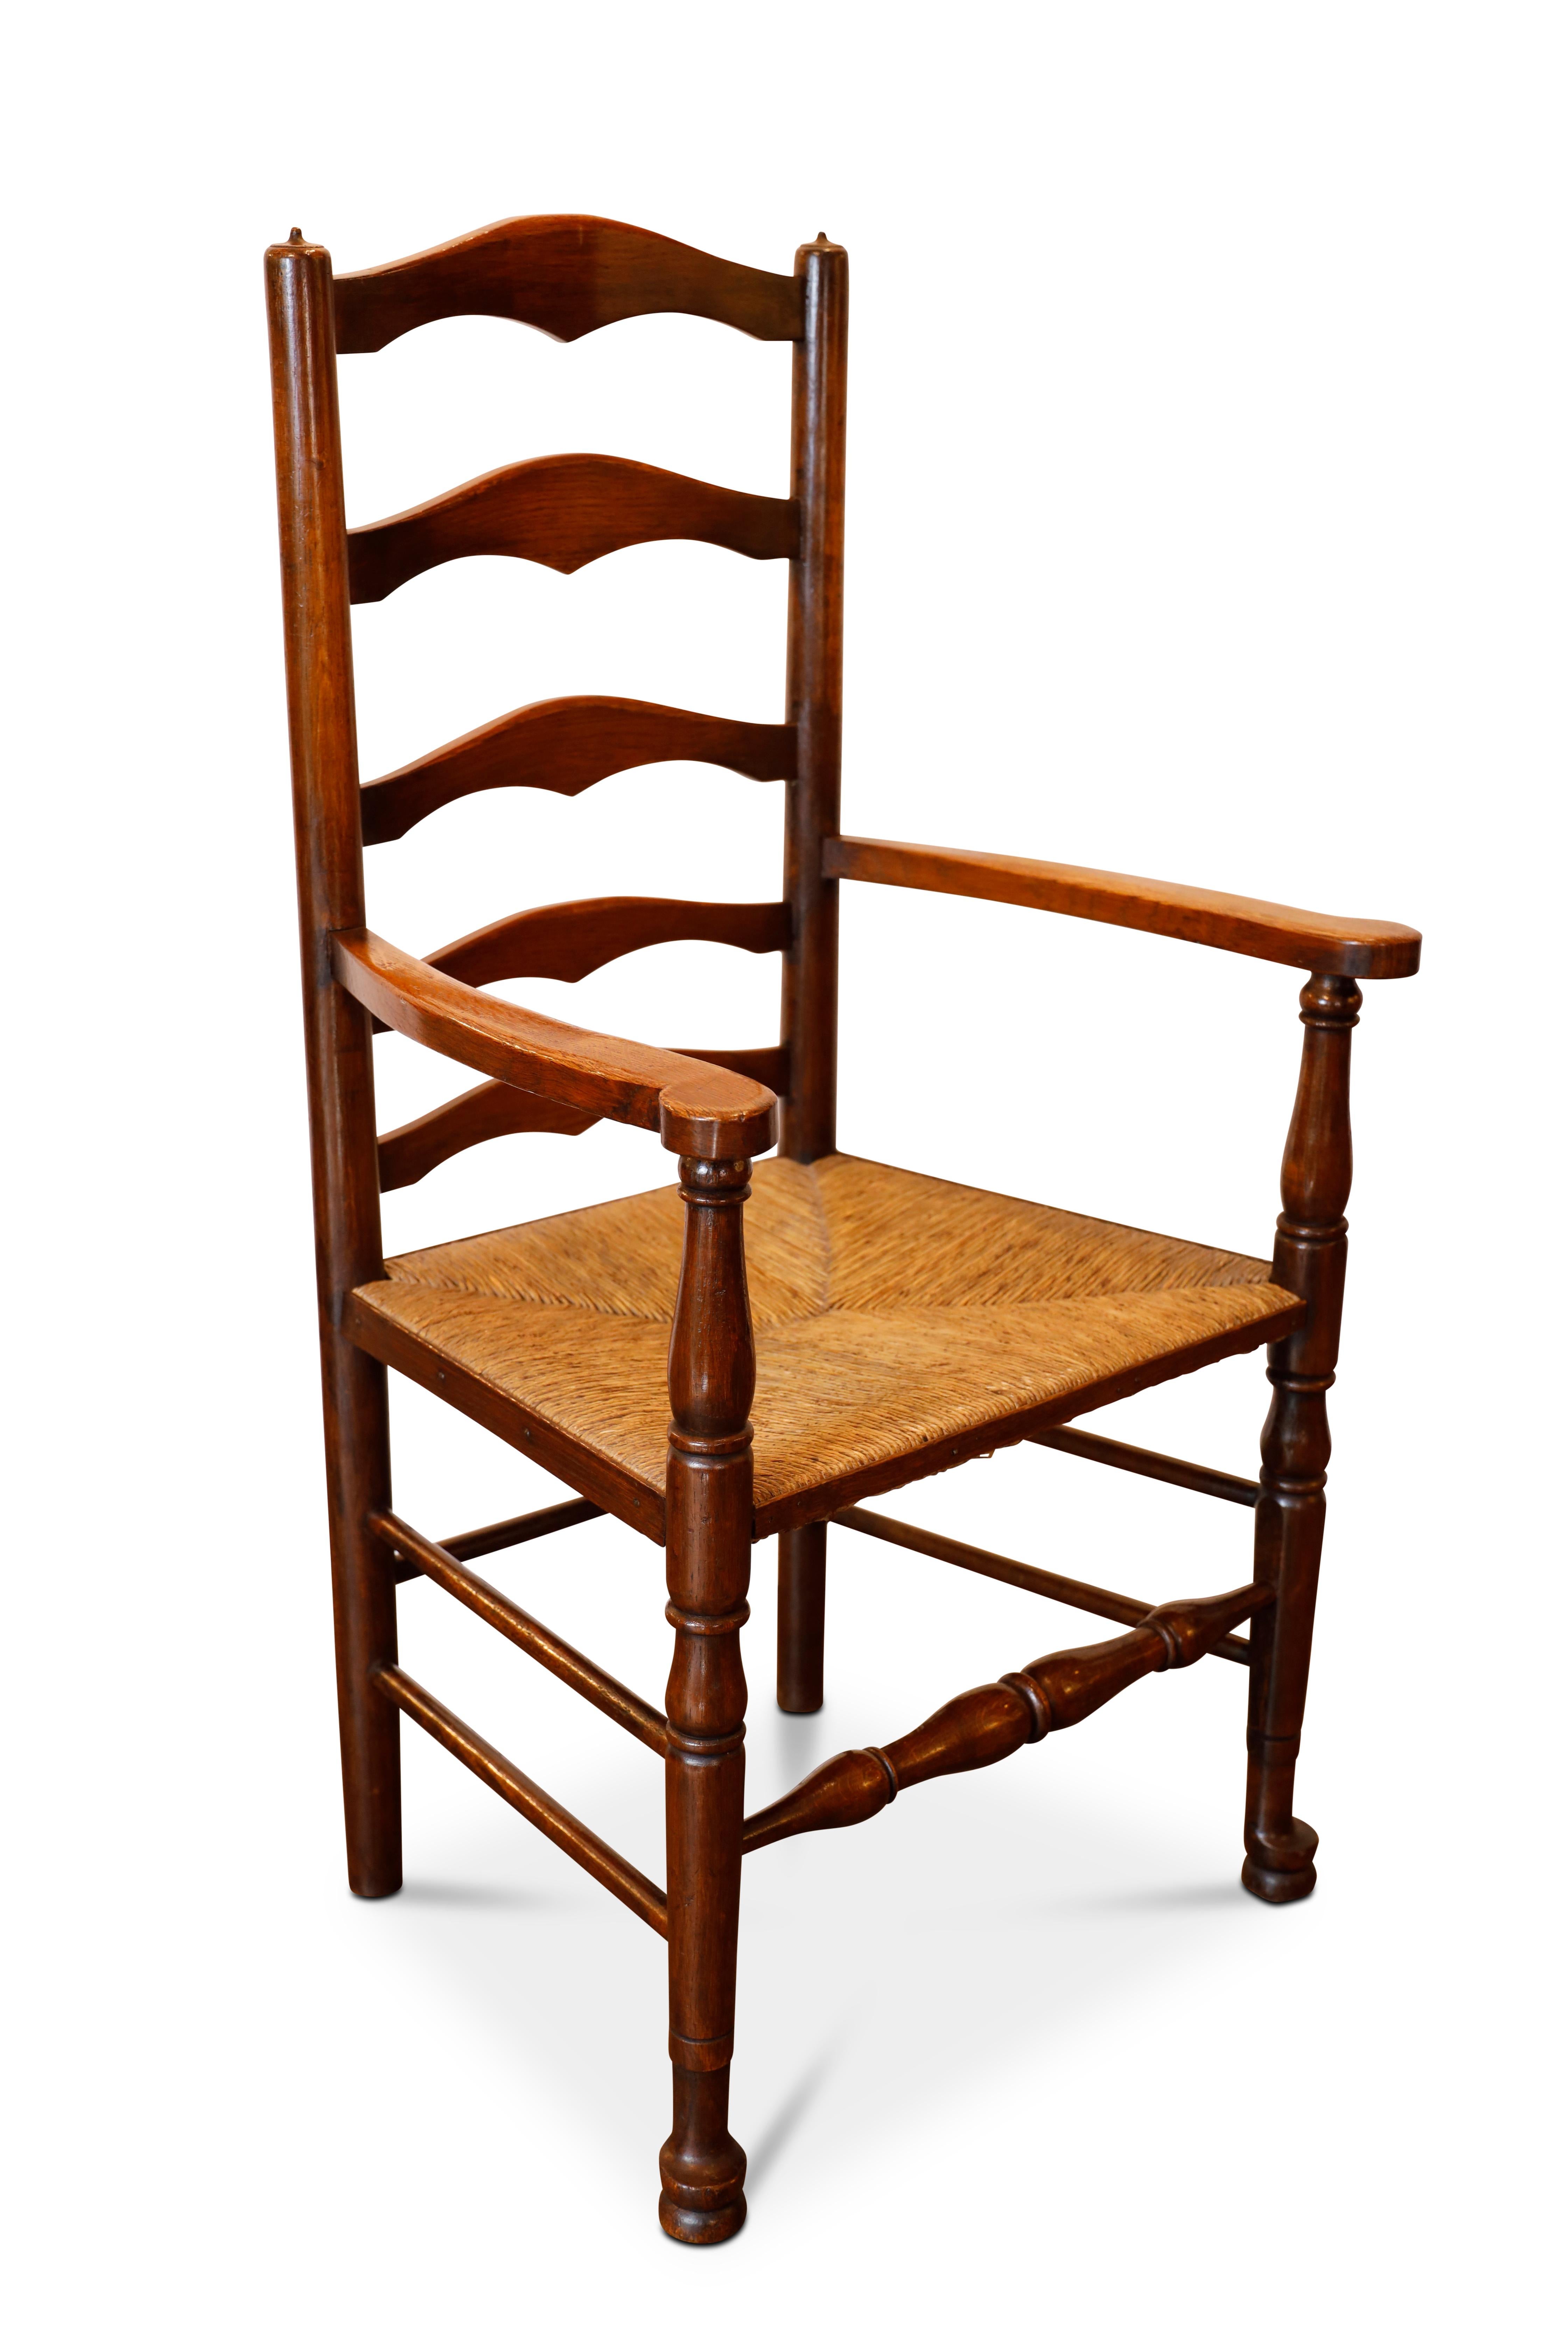 English Ladder Back Chairs In Excellent Condition For Sale In Woodbury, CT